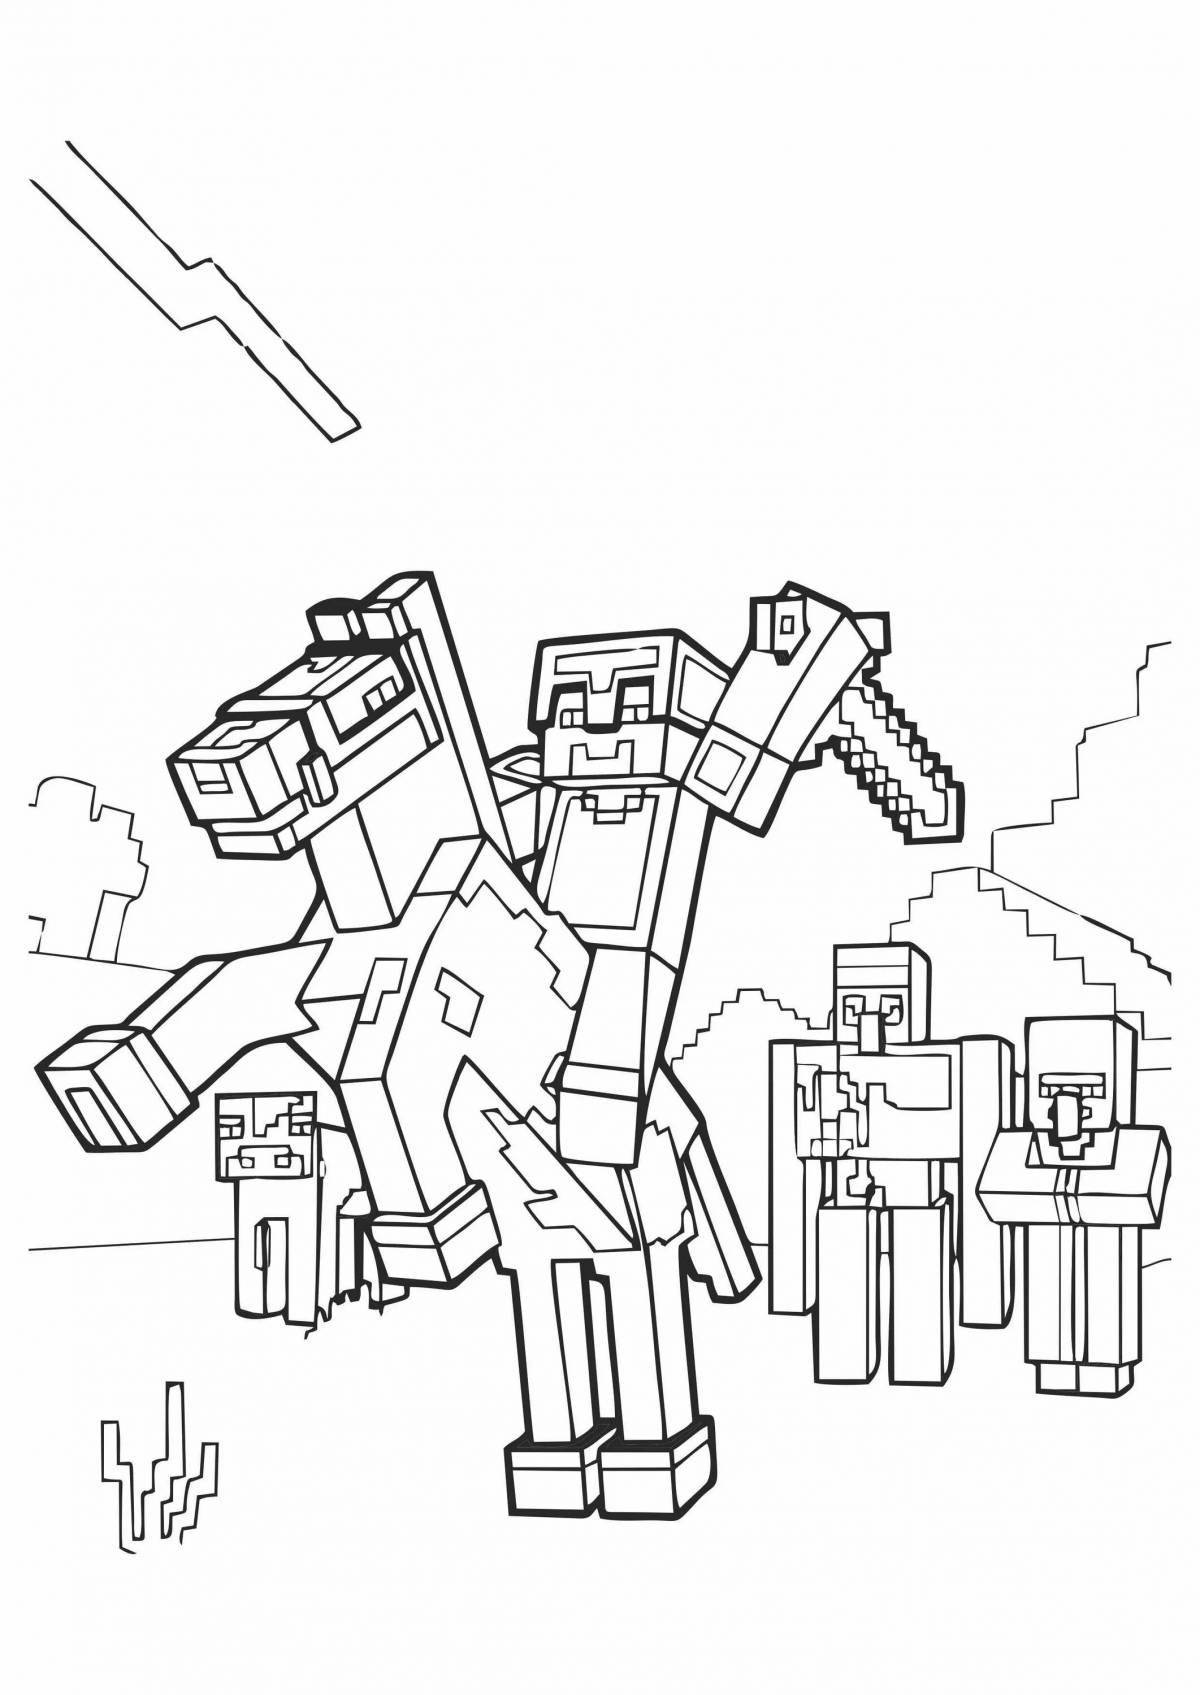 Colorful minecraft man coloring page